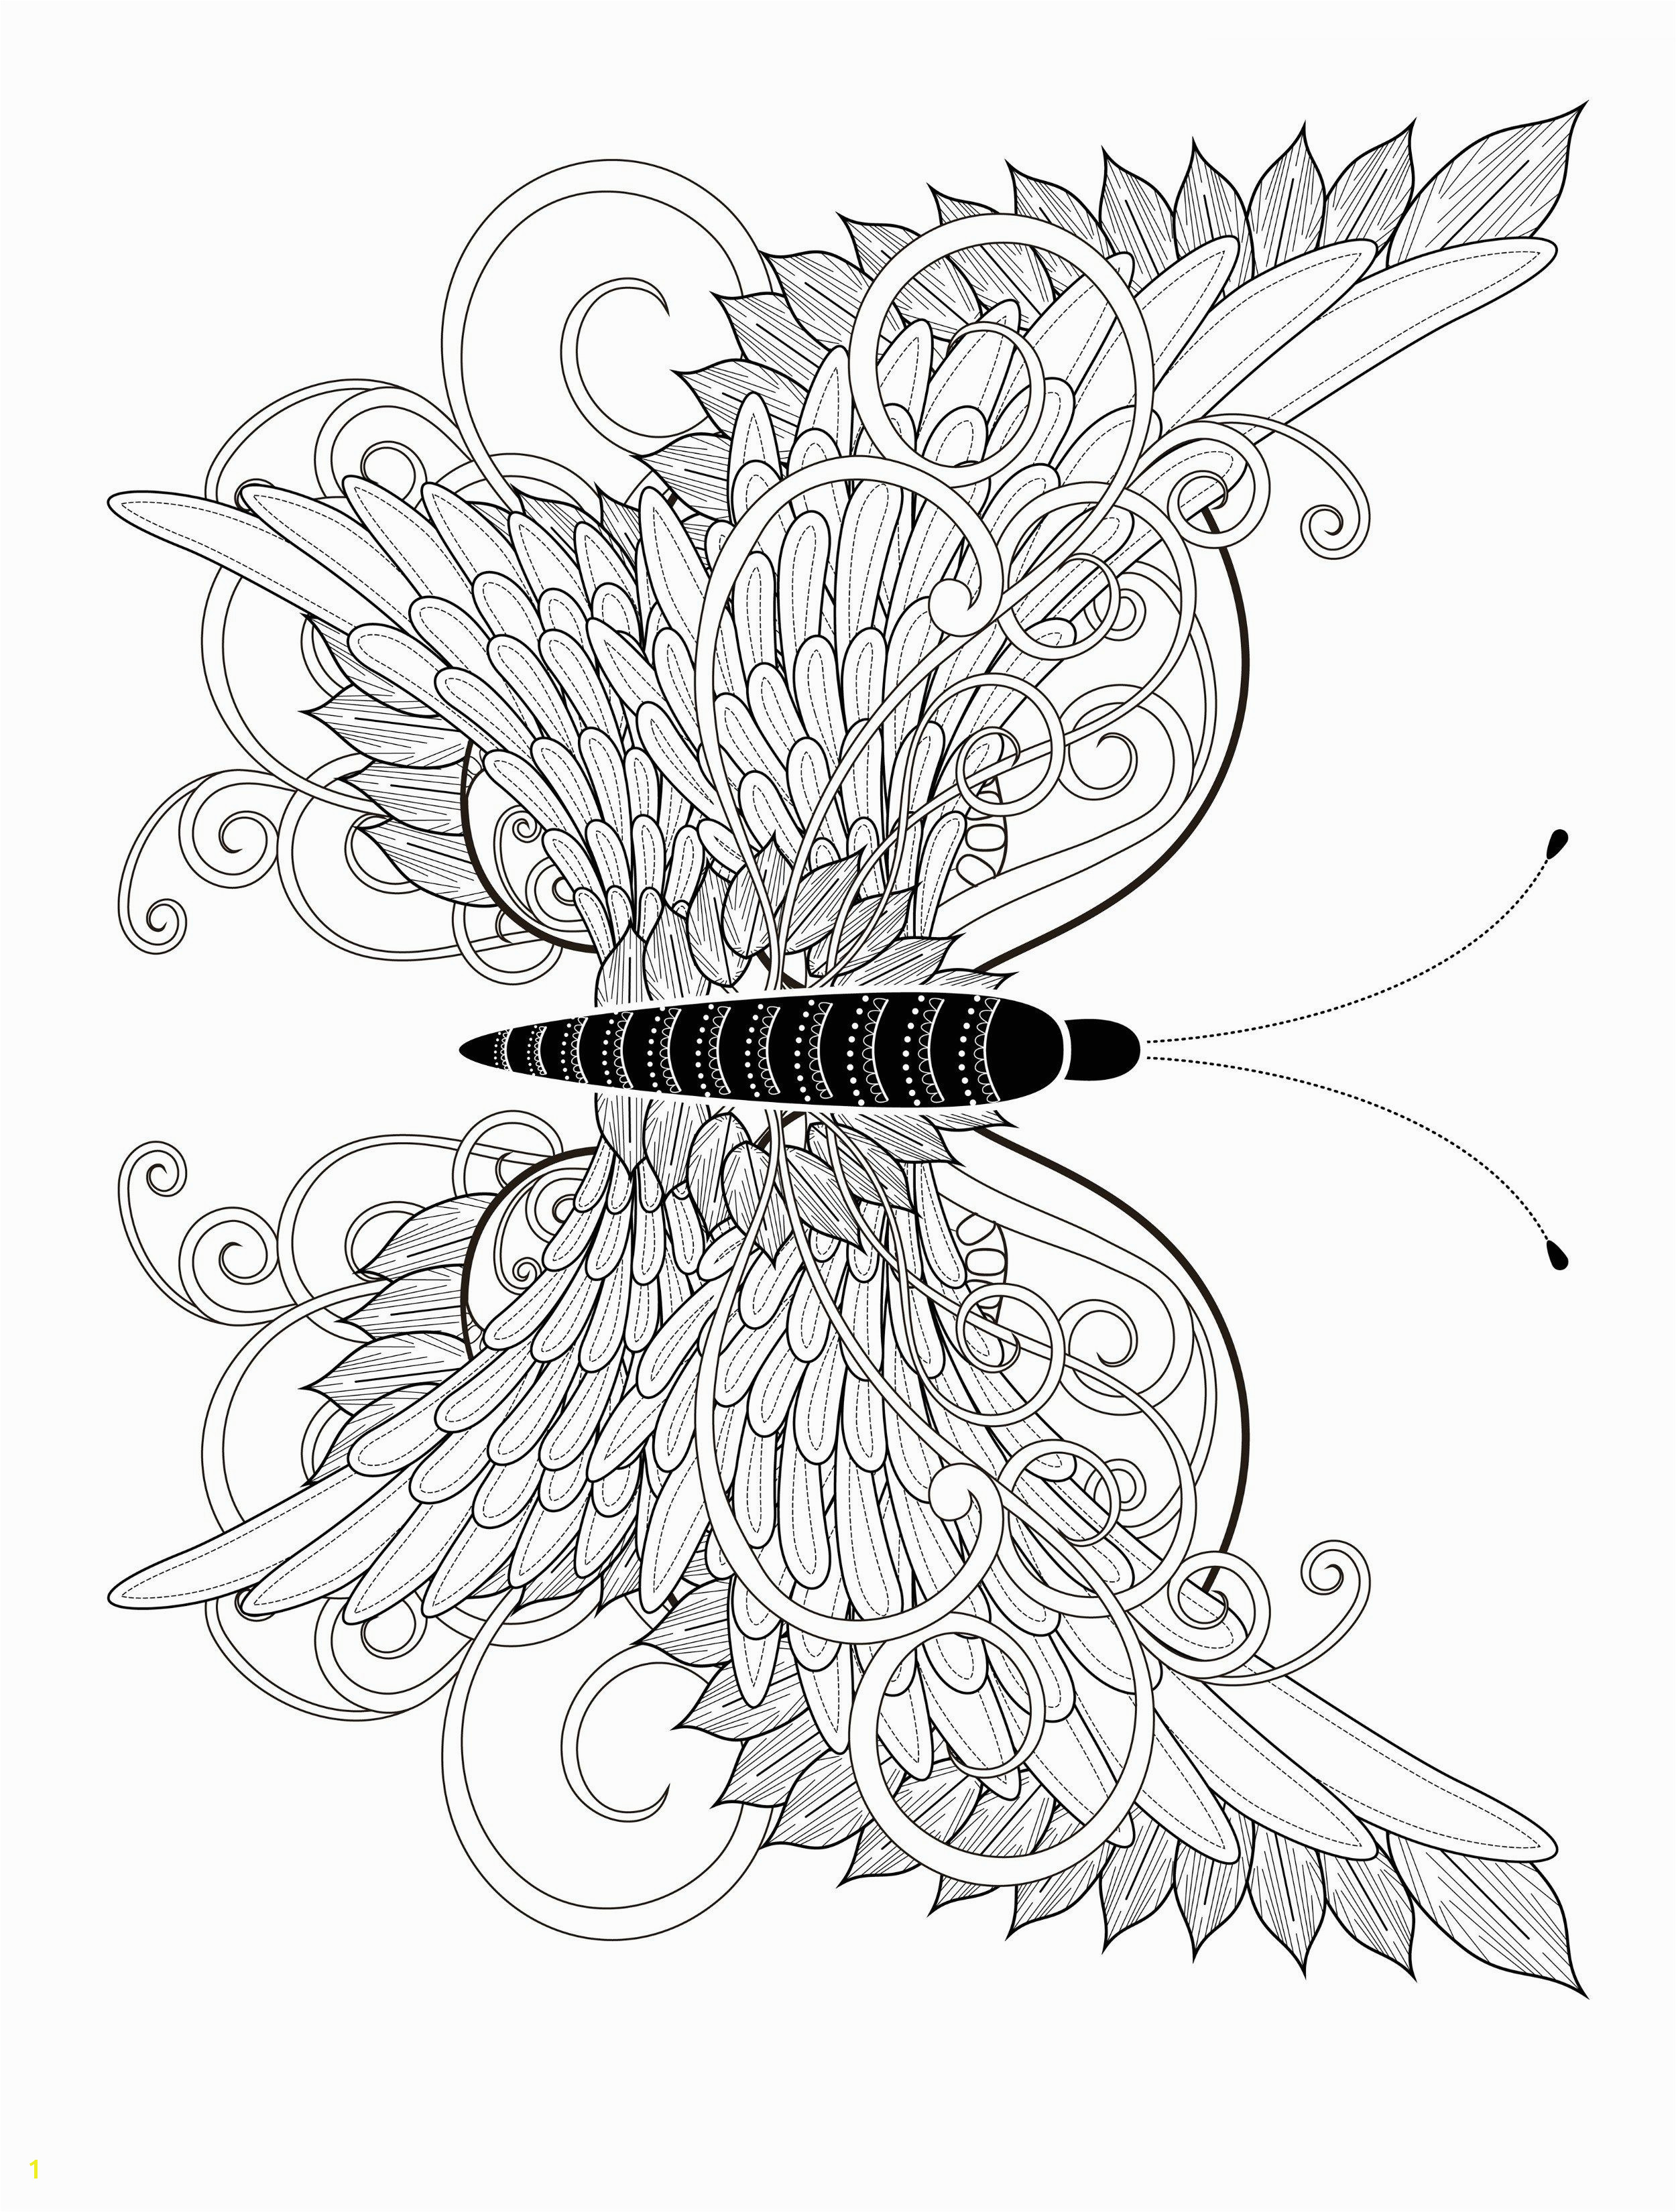 Butterfly Coloring Pages Print 23 Free Printable Insect & Animal Adult Coloring Pages